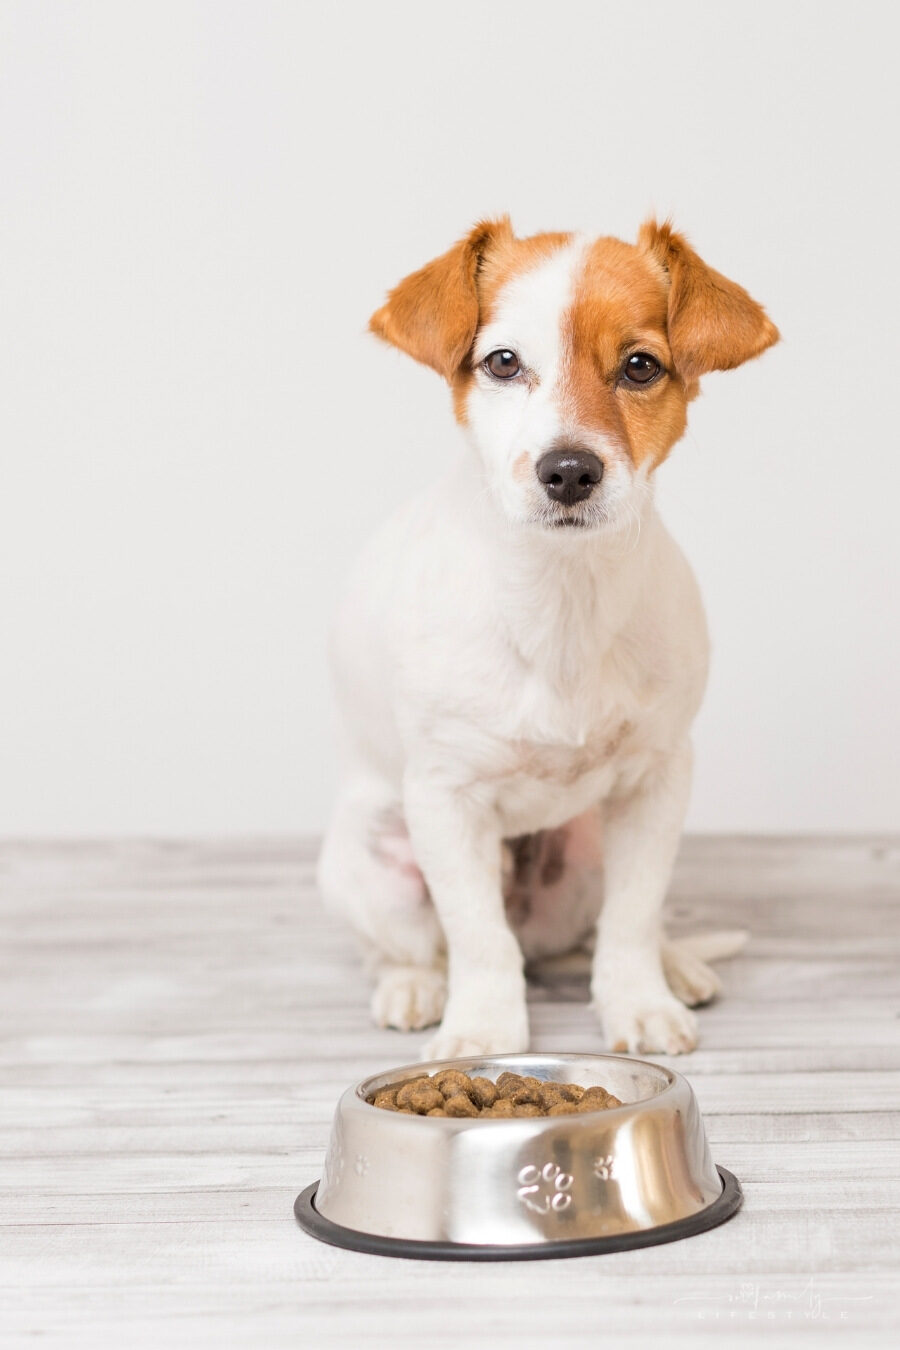 How To Know That Your Dog Is Having A Balanced And Healthy Diet